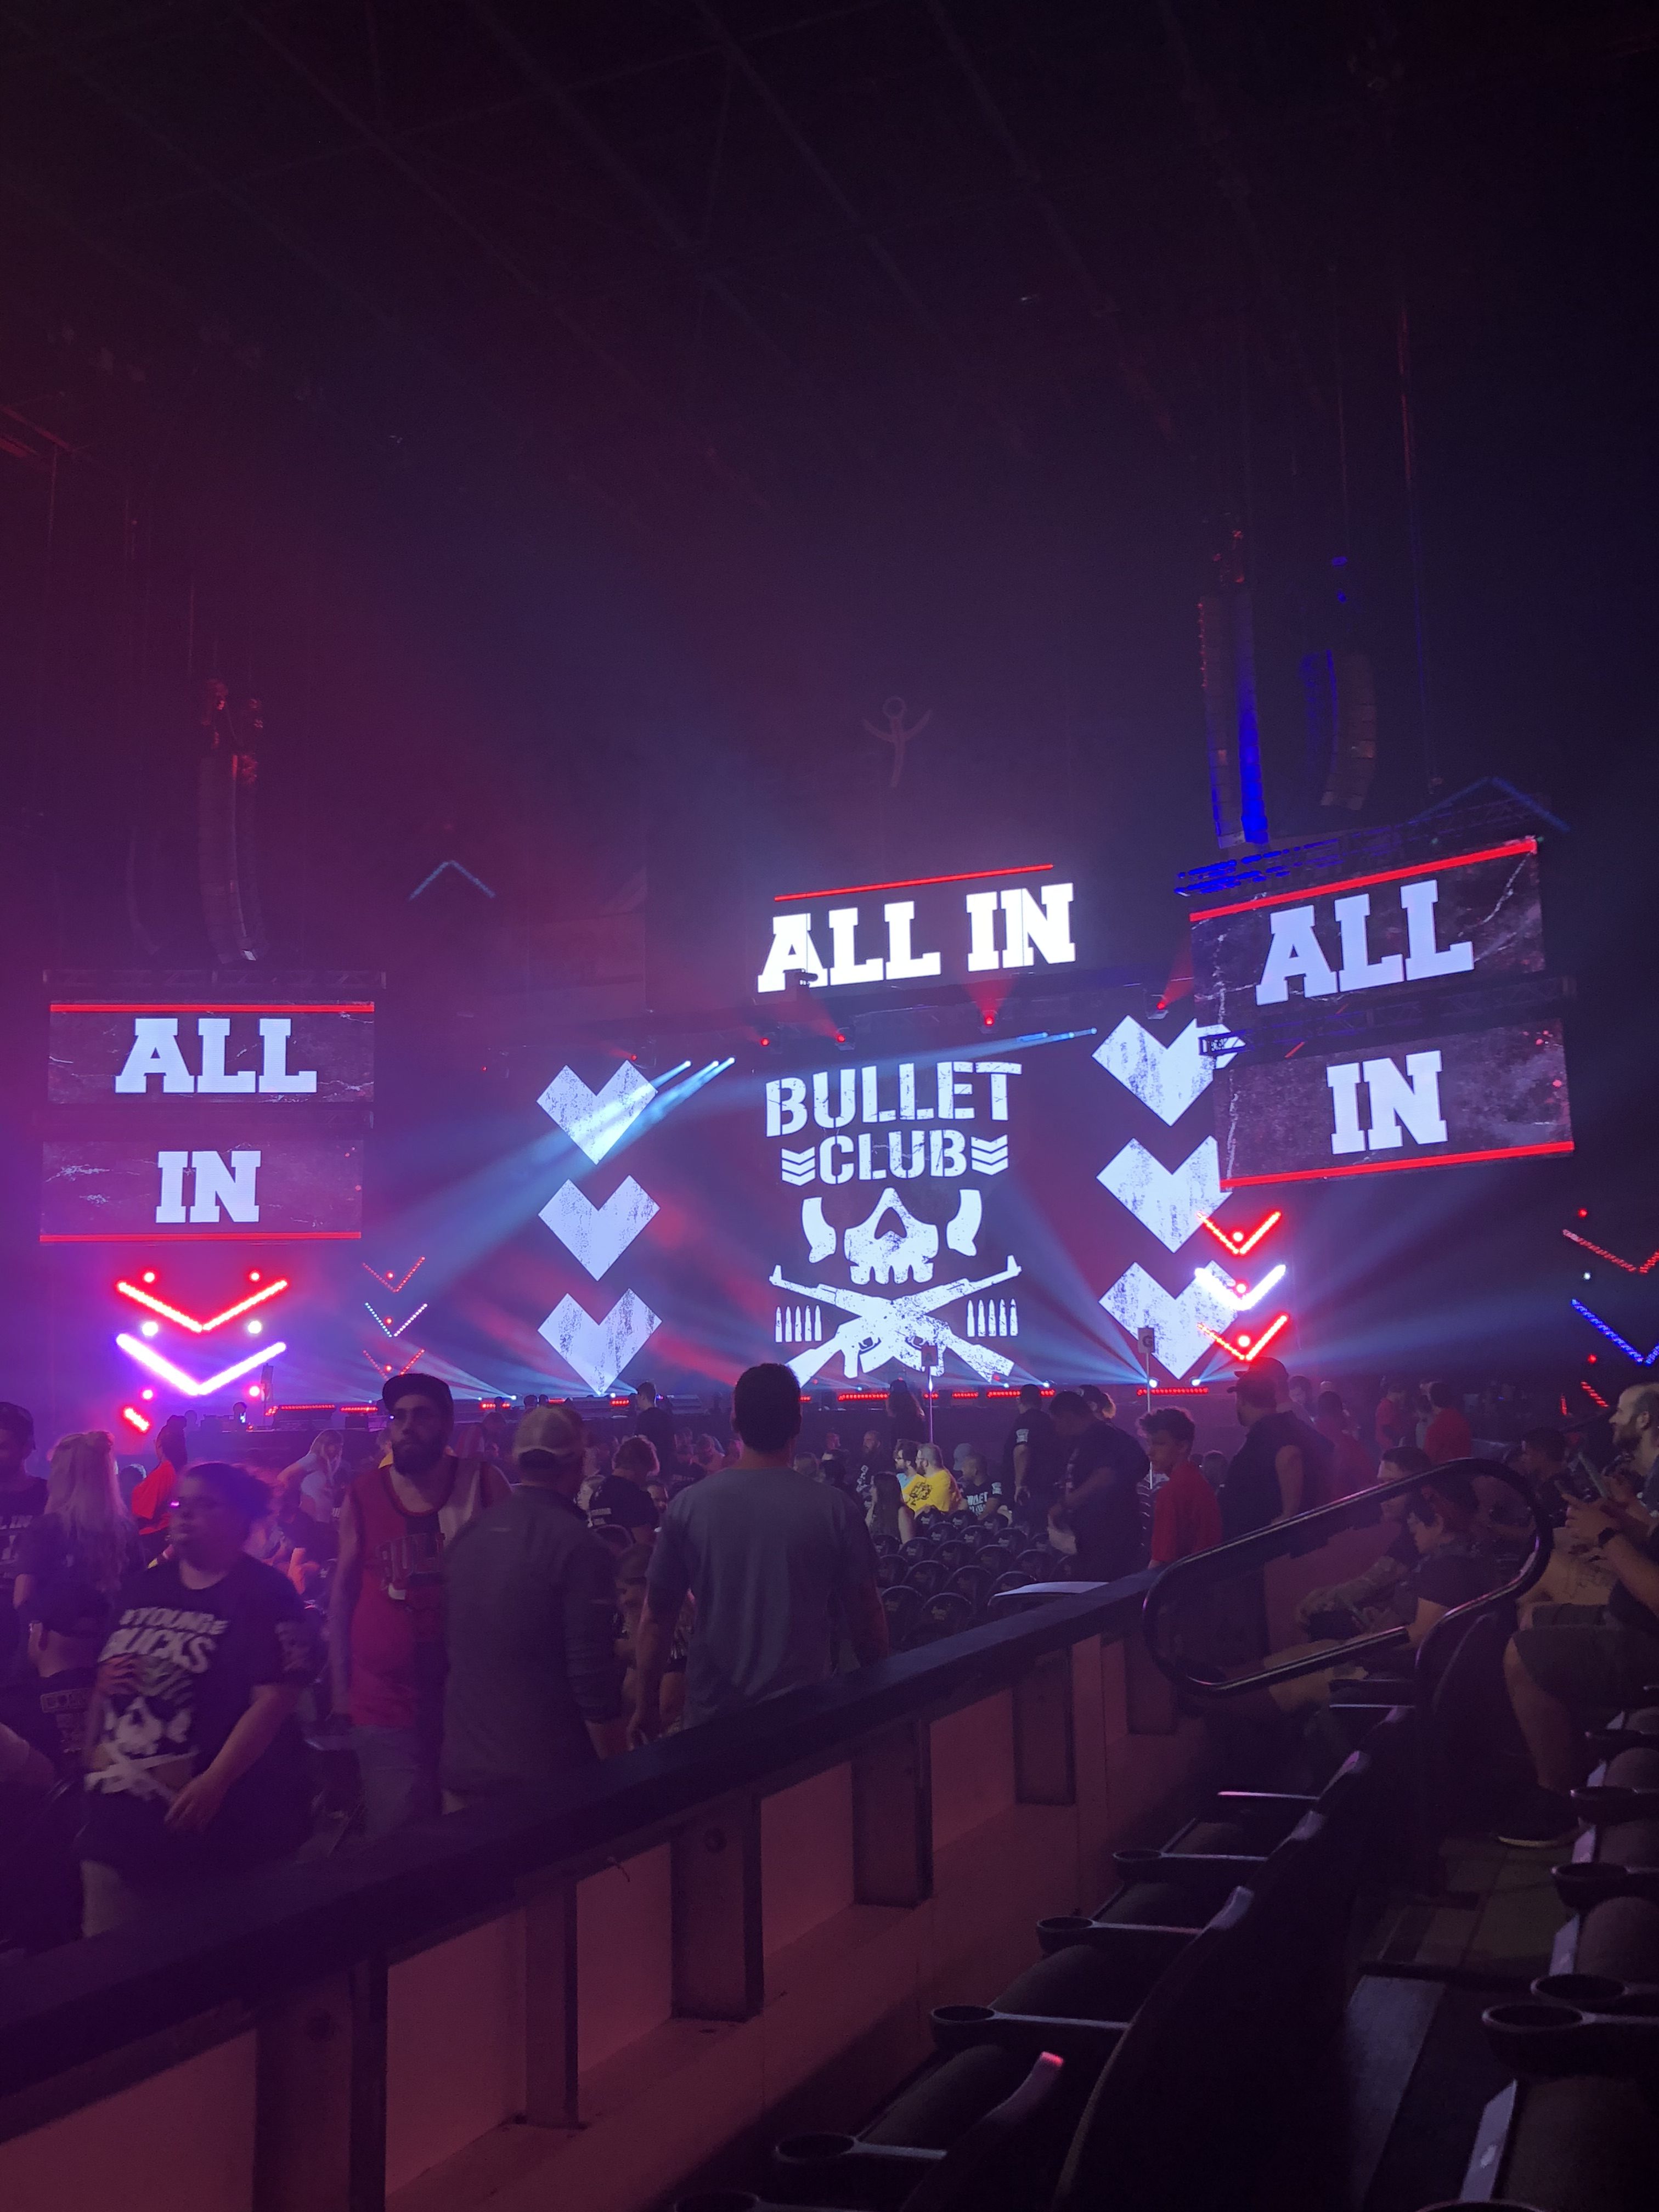 Pictures from All In including Rey Mysterio as Wolverine and Jericho's surprise appearance!